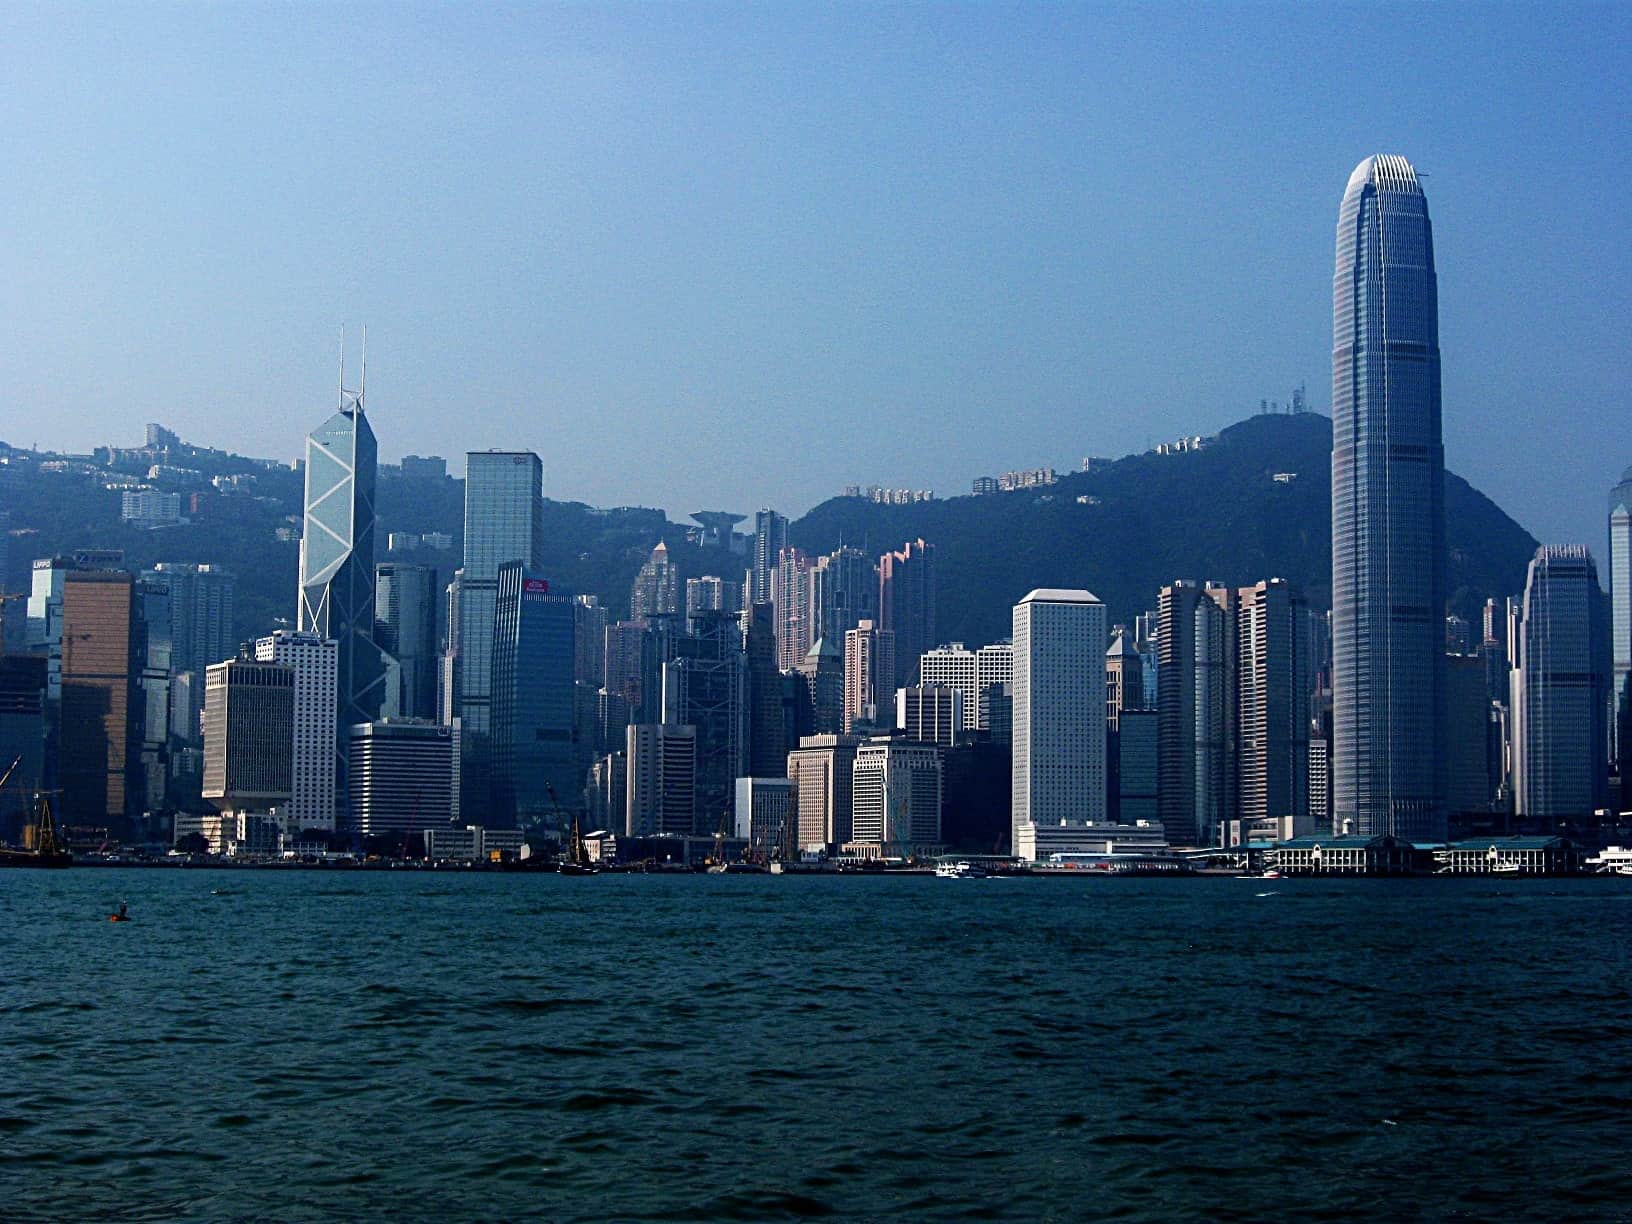 Want to Apply for Hong Kong Visa? Get the Complete Information